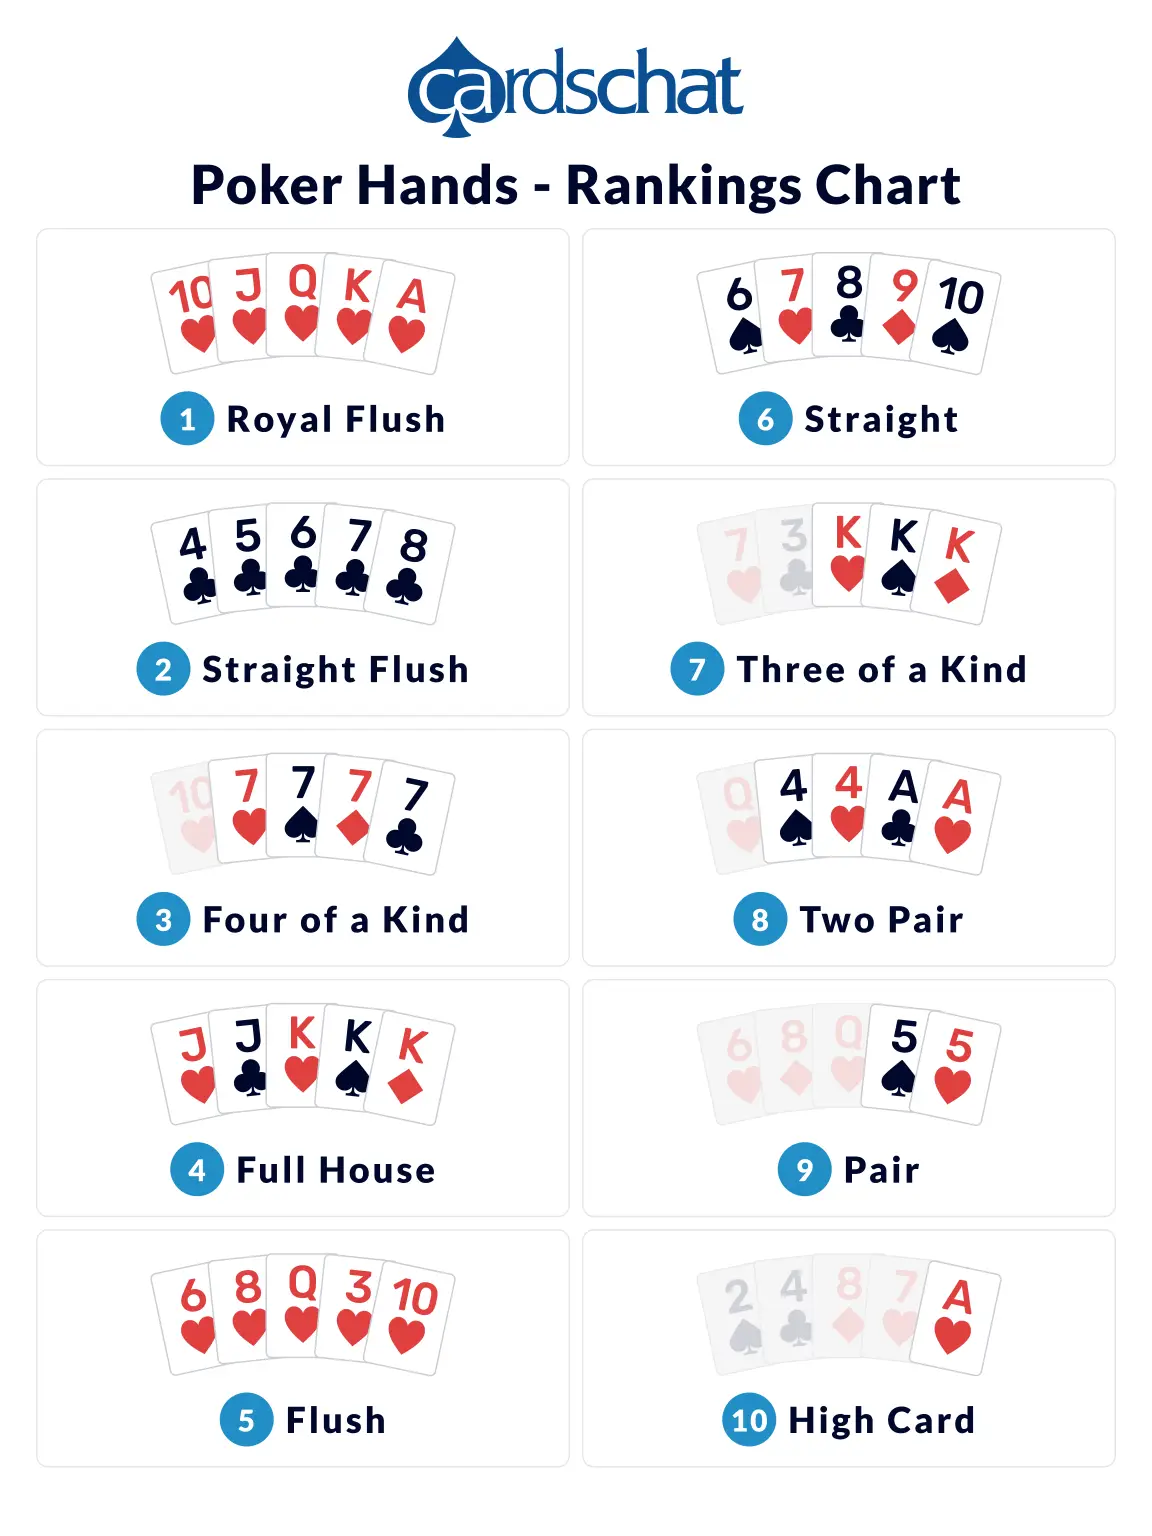 4 Most Common Problems With pokermatch poker